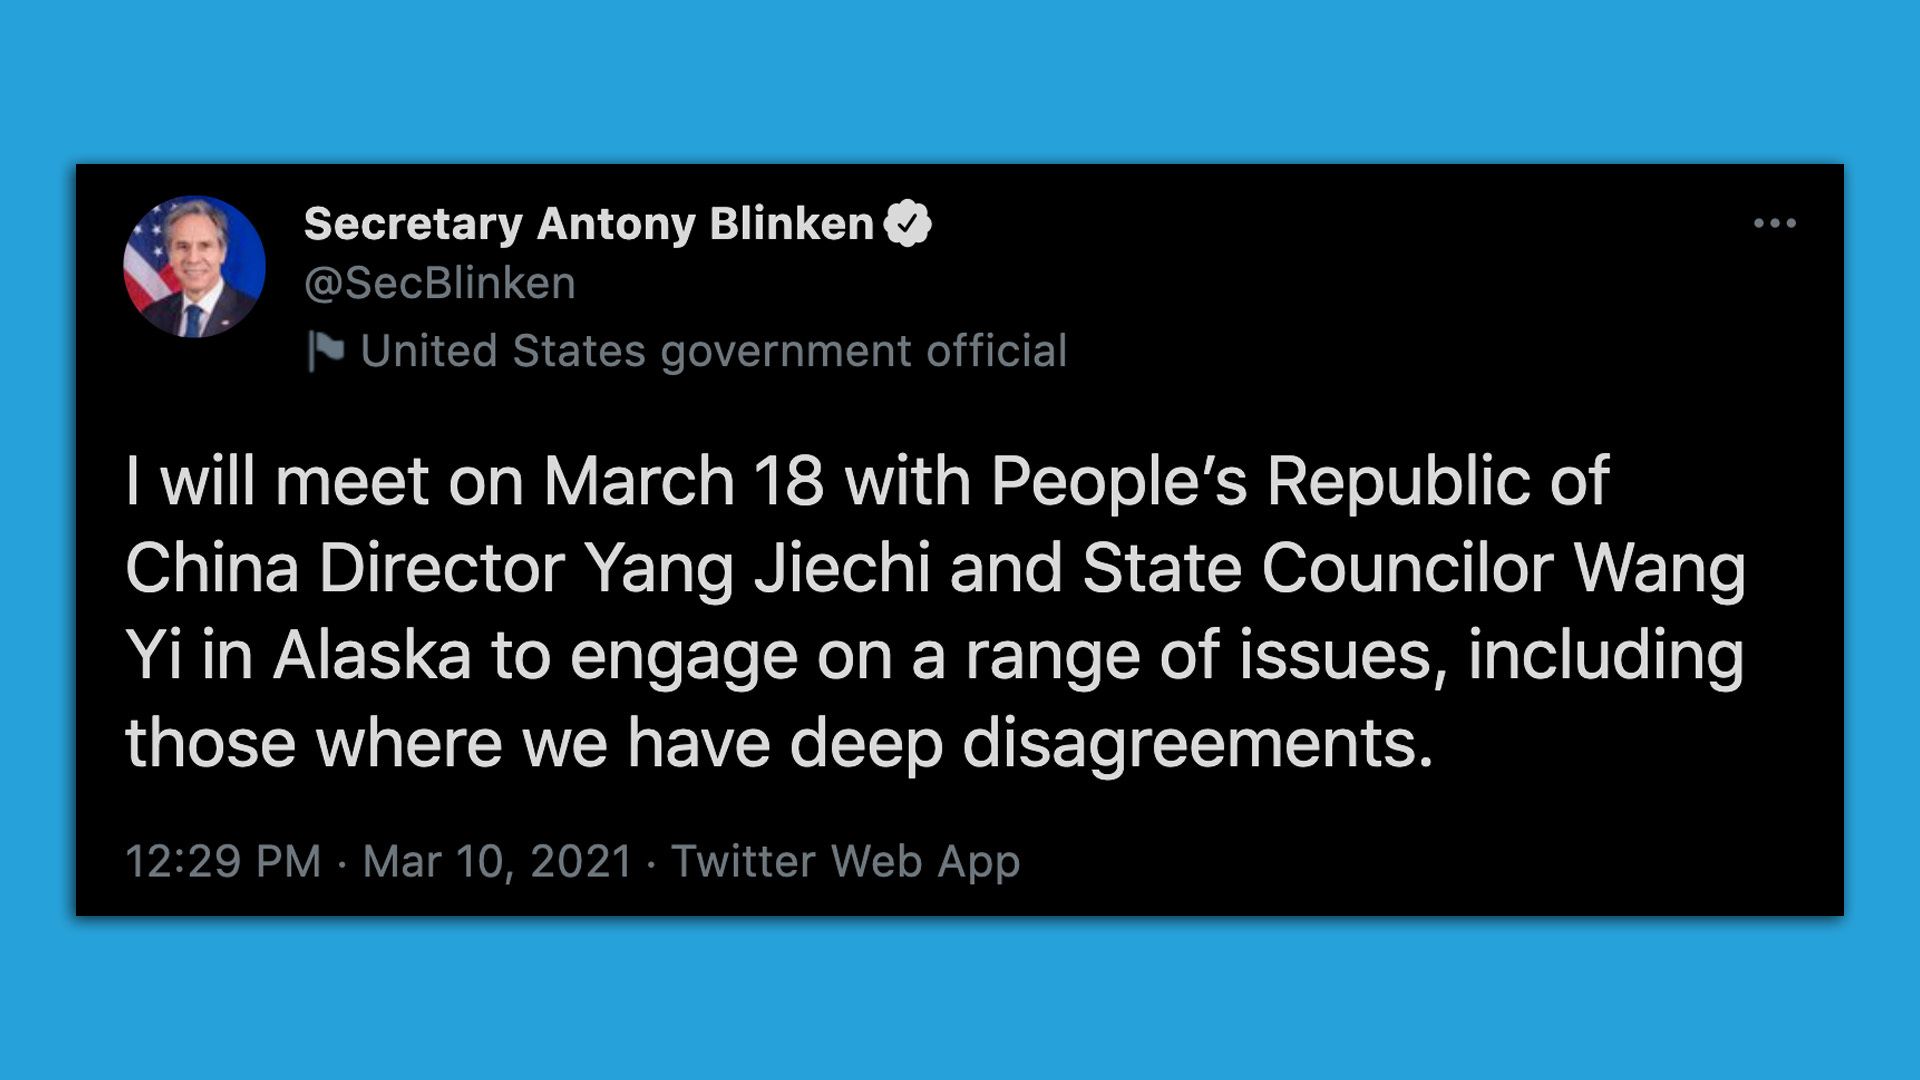 A screenshot shows a tweet from Secretary of State Tony Blinken announcing a meeting with China officials next week.